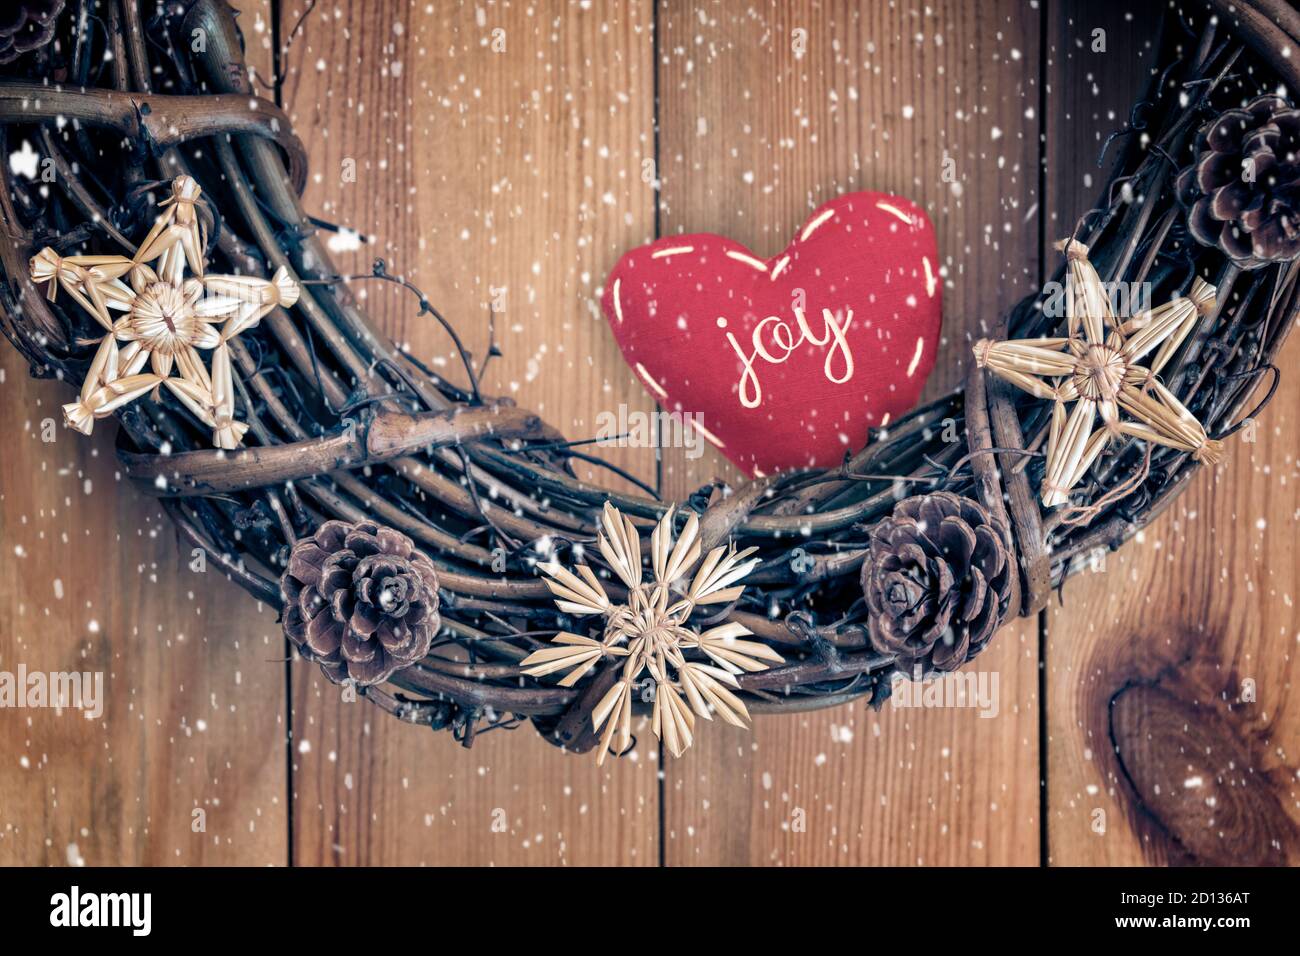 Joy Christmas card. Rustic Christmas wreath, Joy embroidery, winter snow and wooden planks background Stock Photo